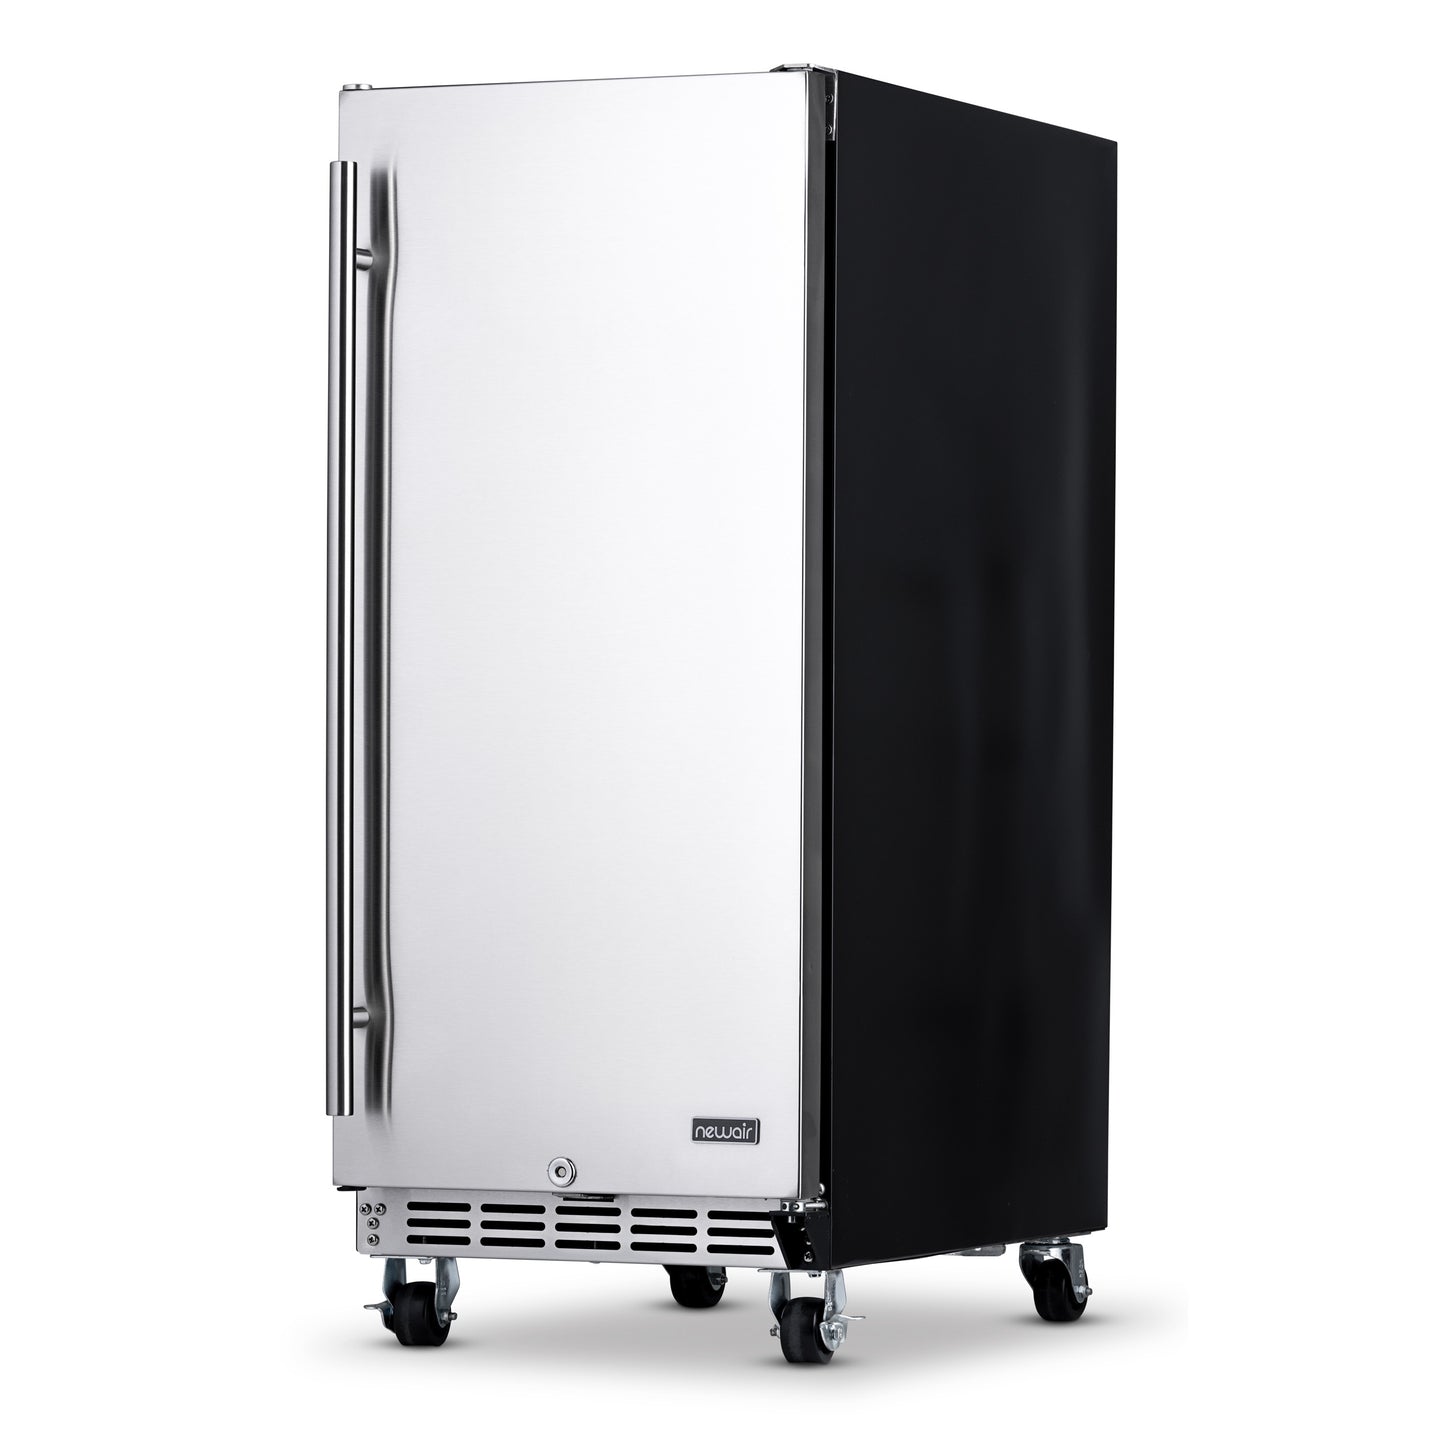 Newair 15” Built-in 90 Can Outdoor Beverage Fridge in Weatherproof Stainless Steel with Auto-Closing Door and Easy Glide Casters NOF090SS00-Beverage Fridges-The Wine Cooler Club